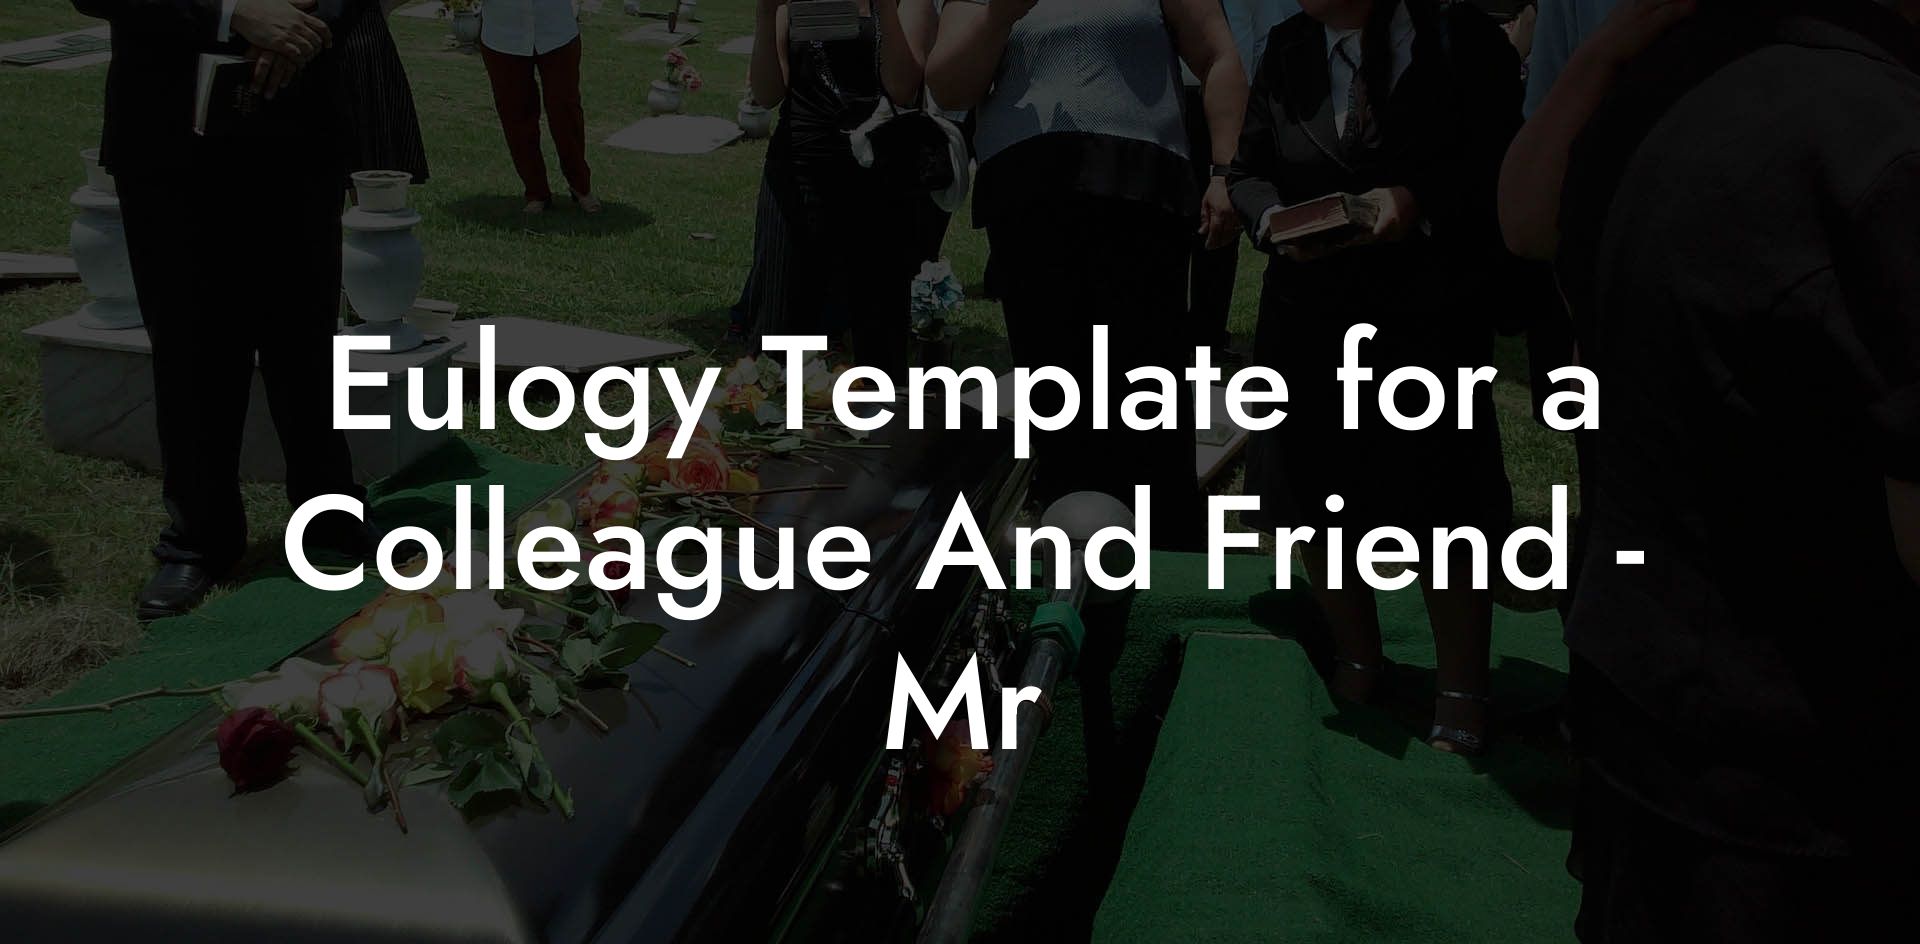 Eulogy Template for a Colleague And Friend - Mr